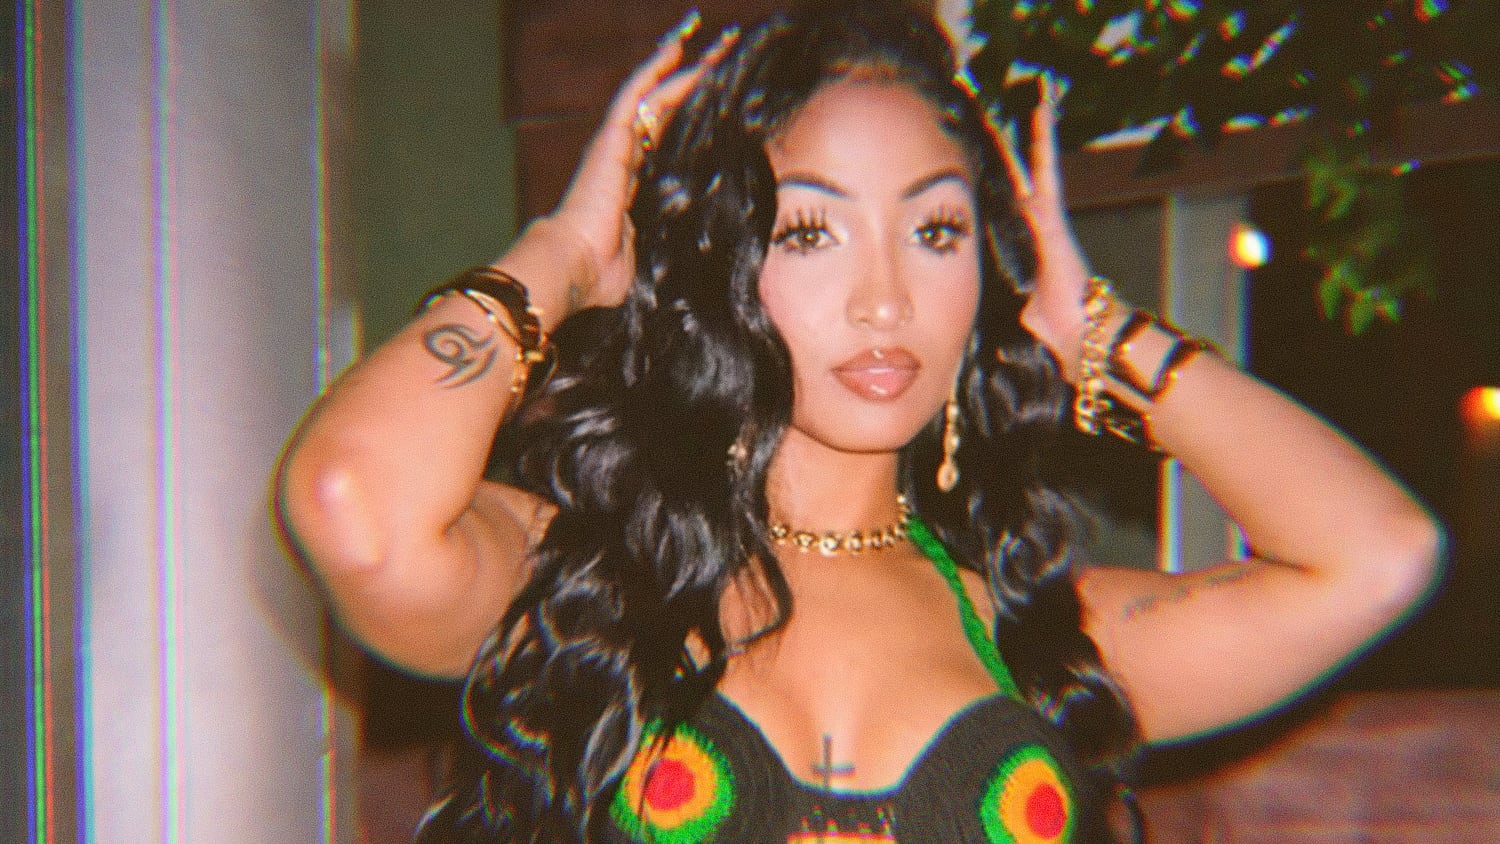 Shenseea Agrees Pineapple Is Beneficial For Vagina